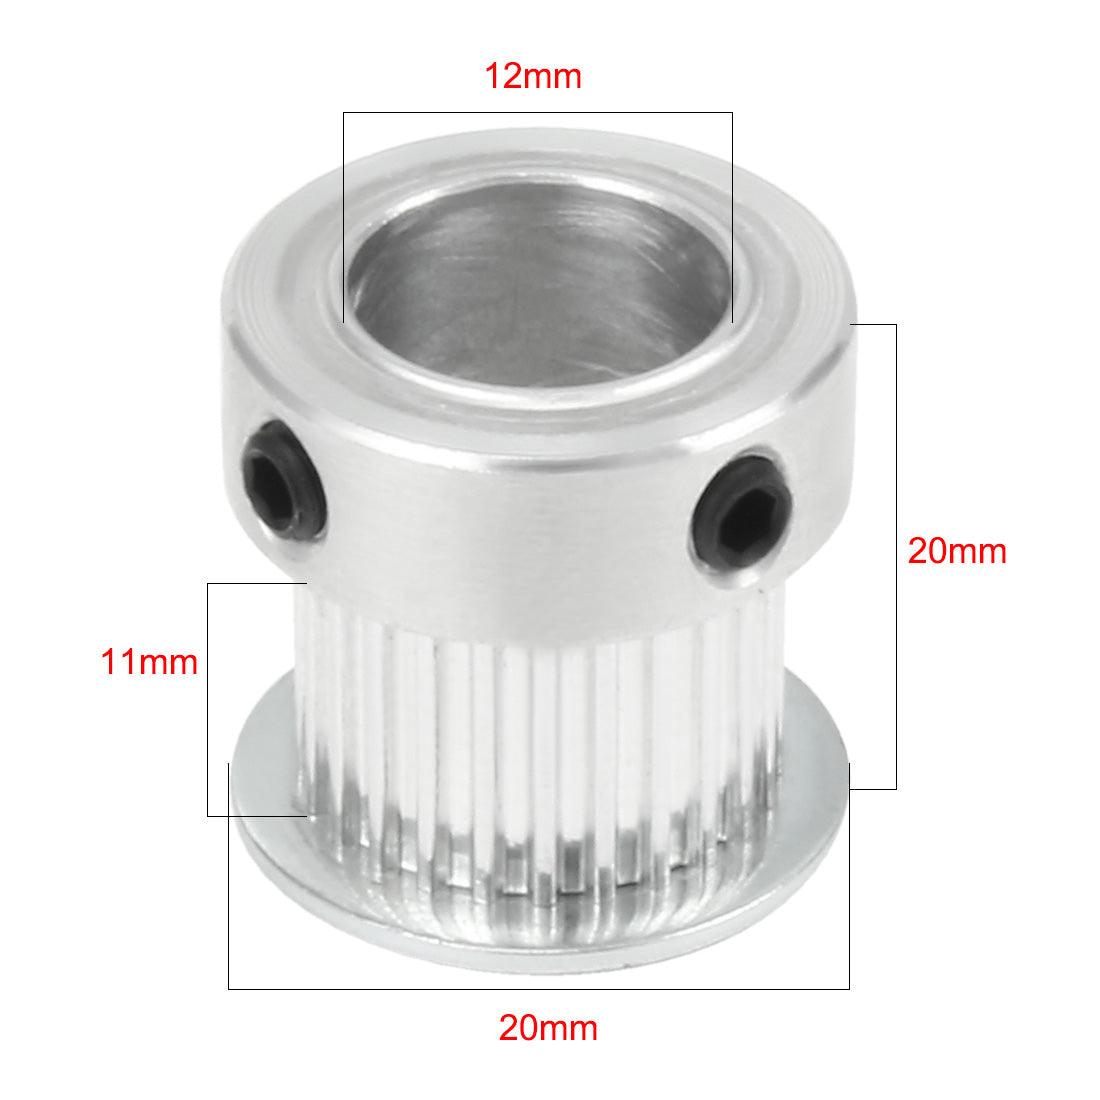 uxcell Uxcell Aluminum M-X-L 25 Teeth 12mm Bore Timing Belt Idler Pulley Flange Synchronous Wheel for 10mm Belt 3D Printer CNC